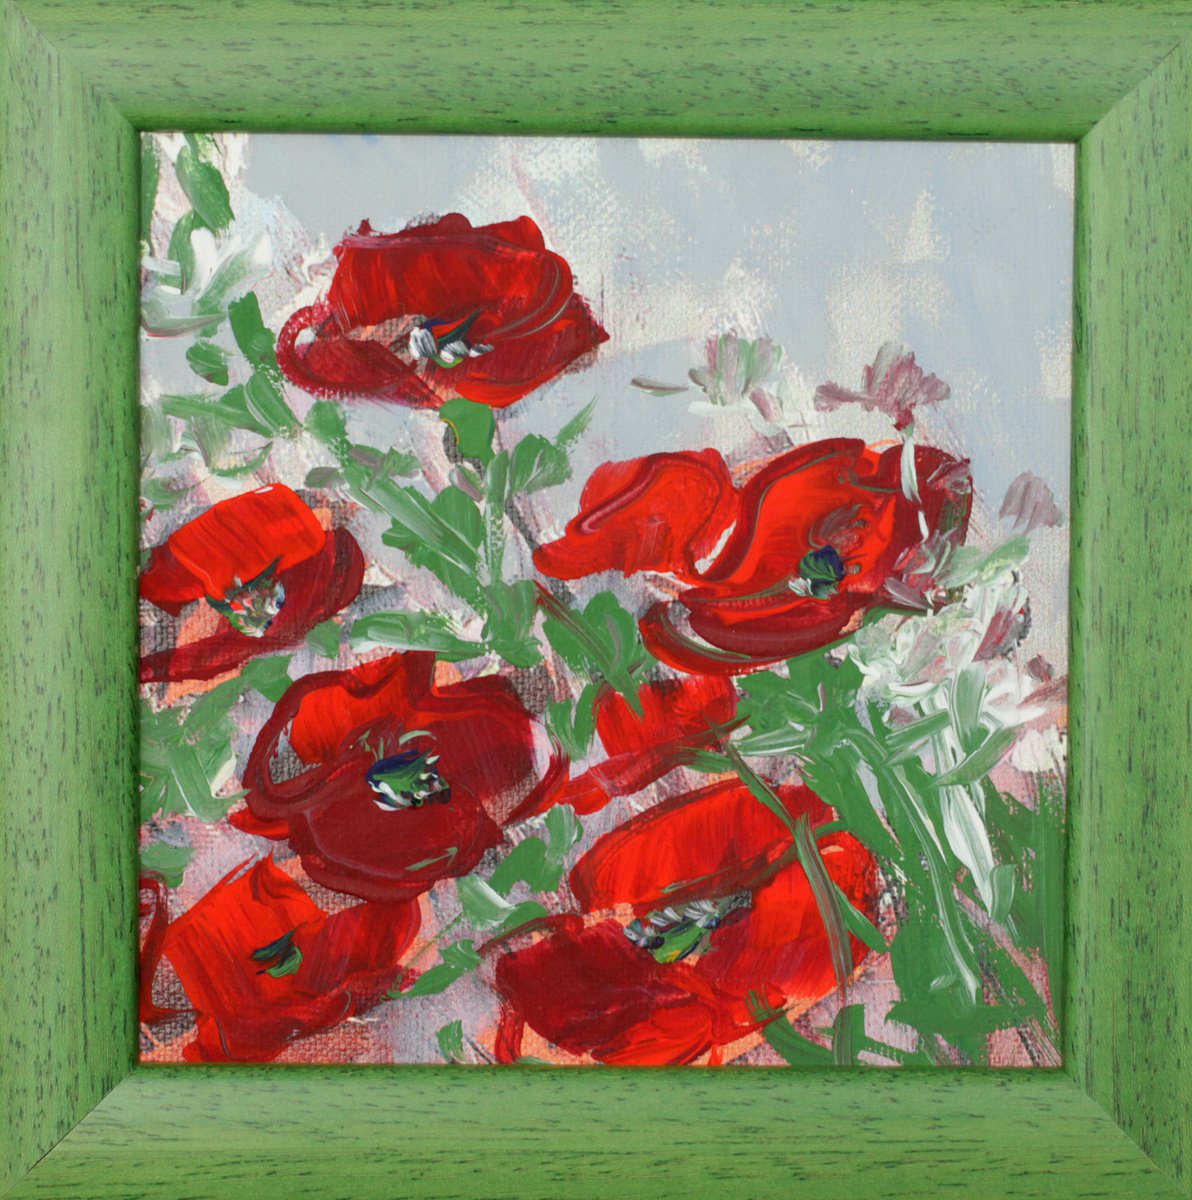 Wind in the poppies I. by Margaret Raven